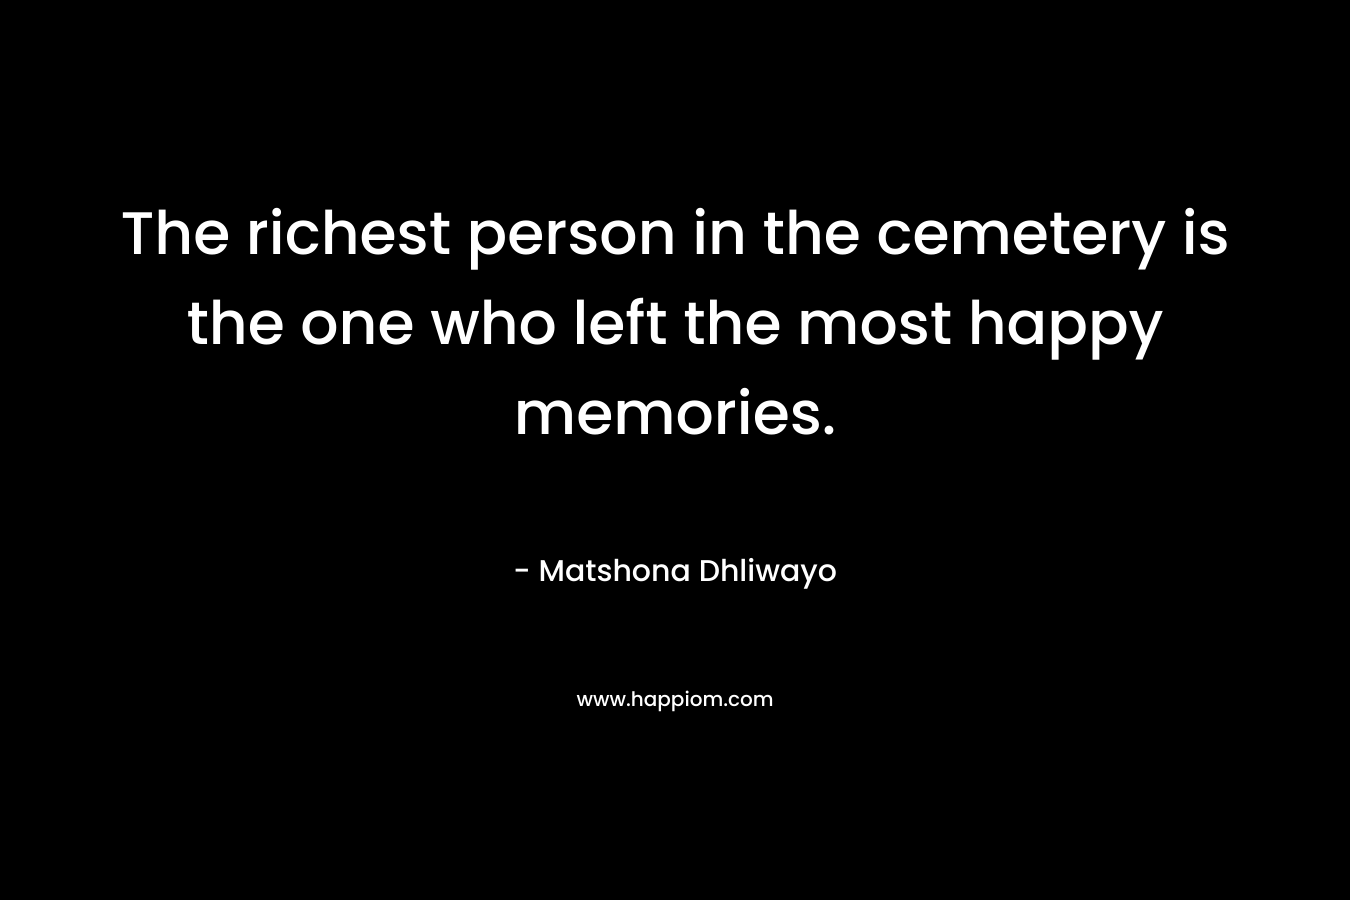 The richest person in the cemetery is the one who left the most happy memories. – Matshona Dhliwayo